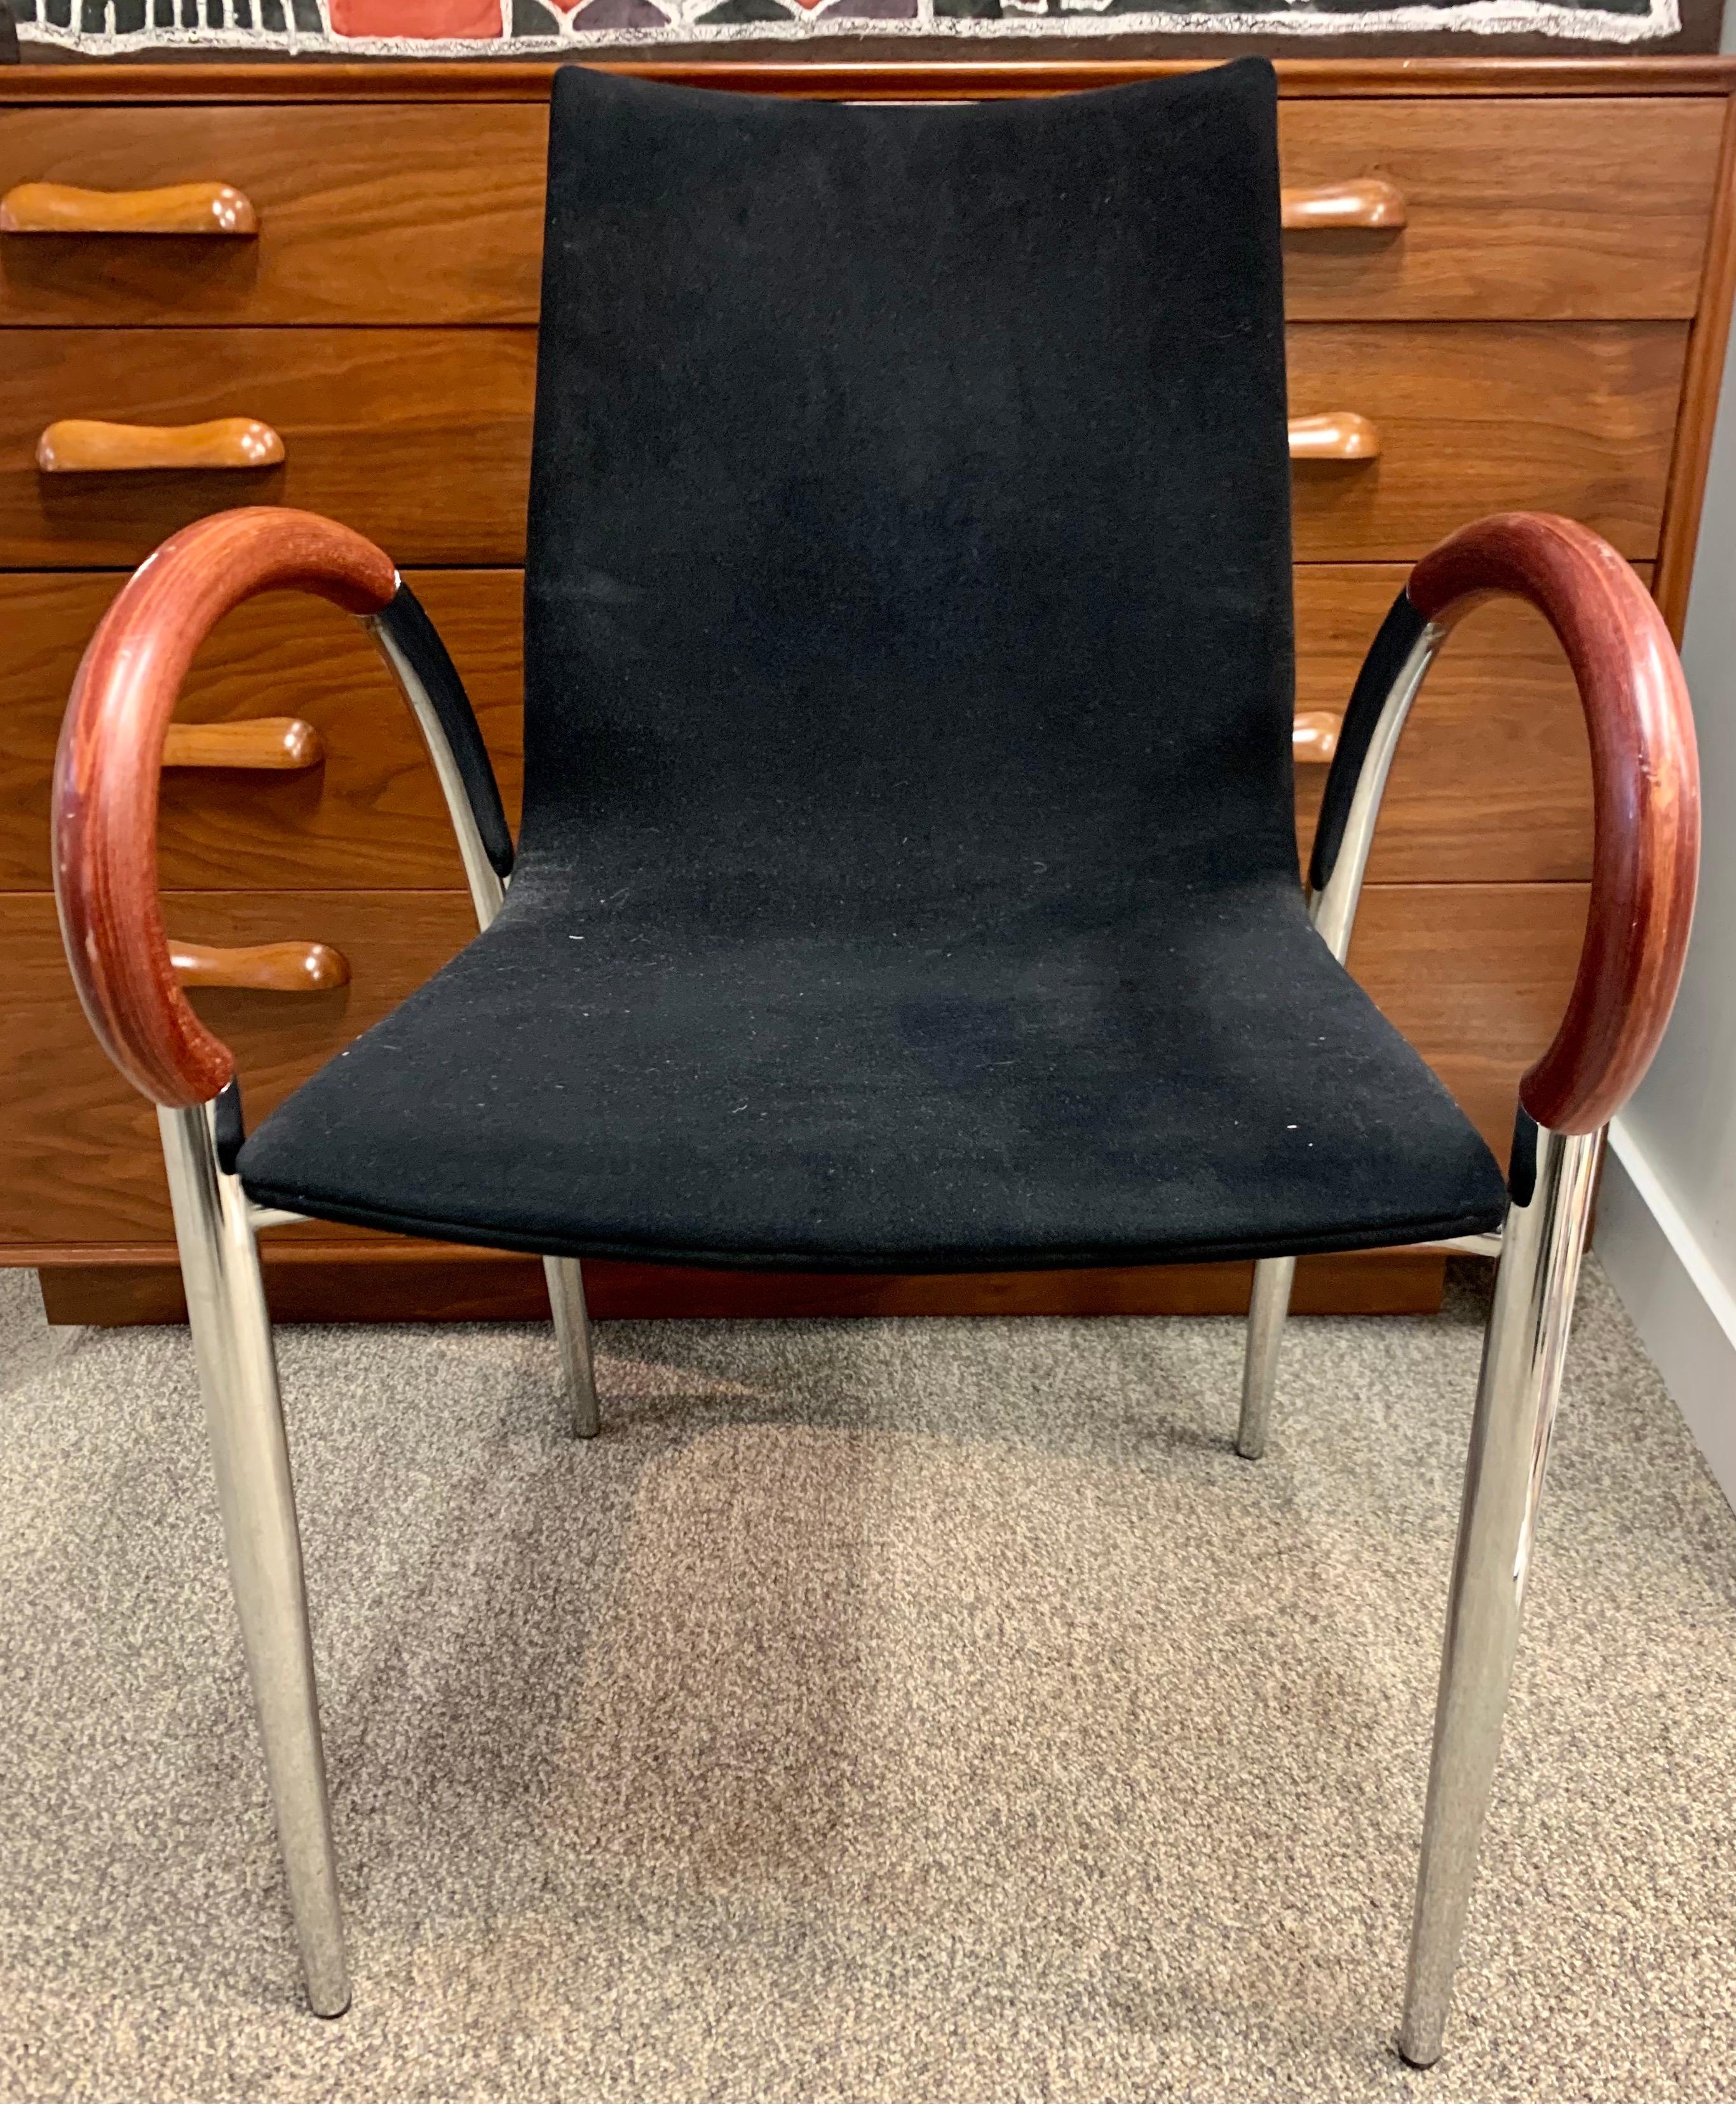 Elegant and unusual set of Mid-Century Modern dining chairs where the arms are made of what looks like rosewood. The color of seat is black. Made in Italy. Now, more than ever, home is where the heart is.
The fabric looks and feels like suede but